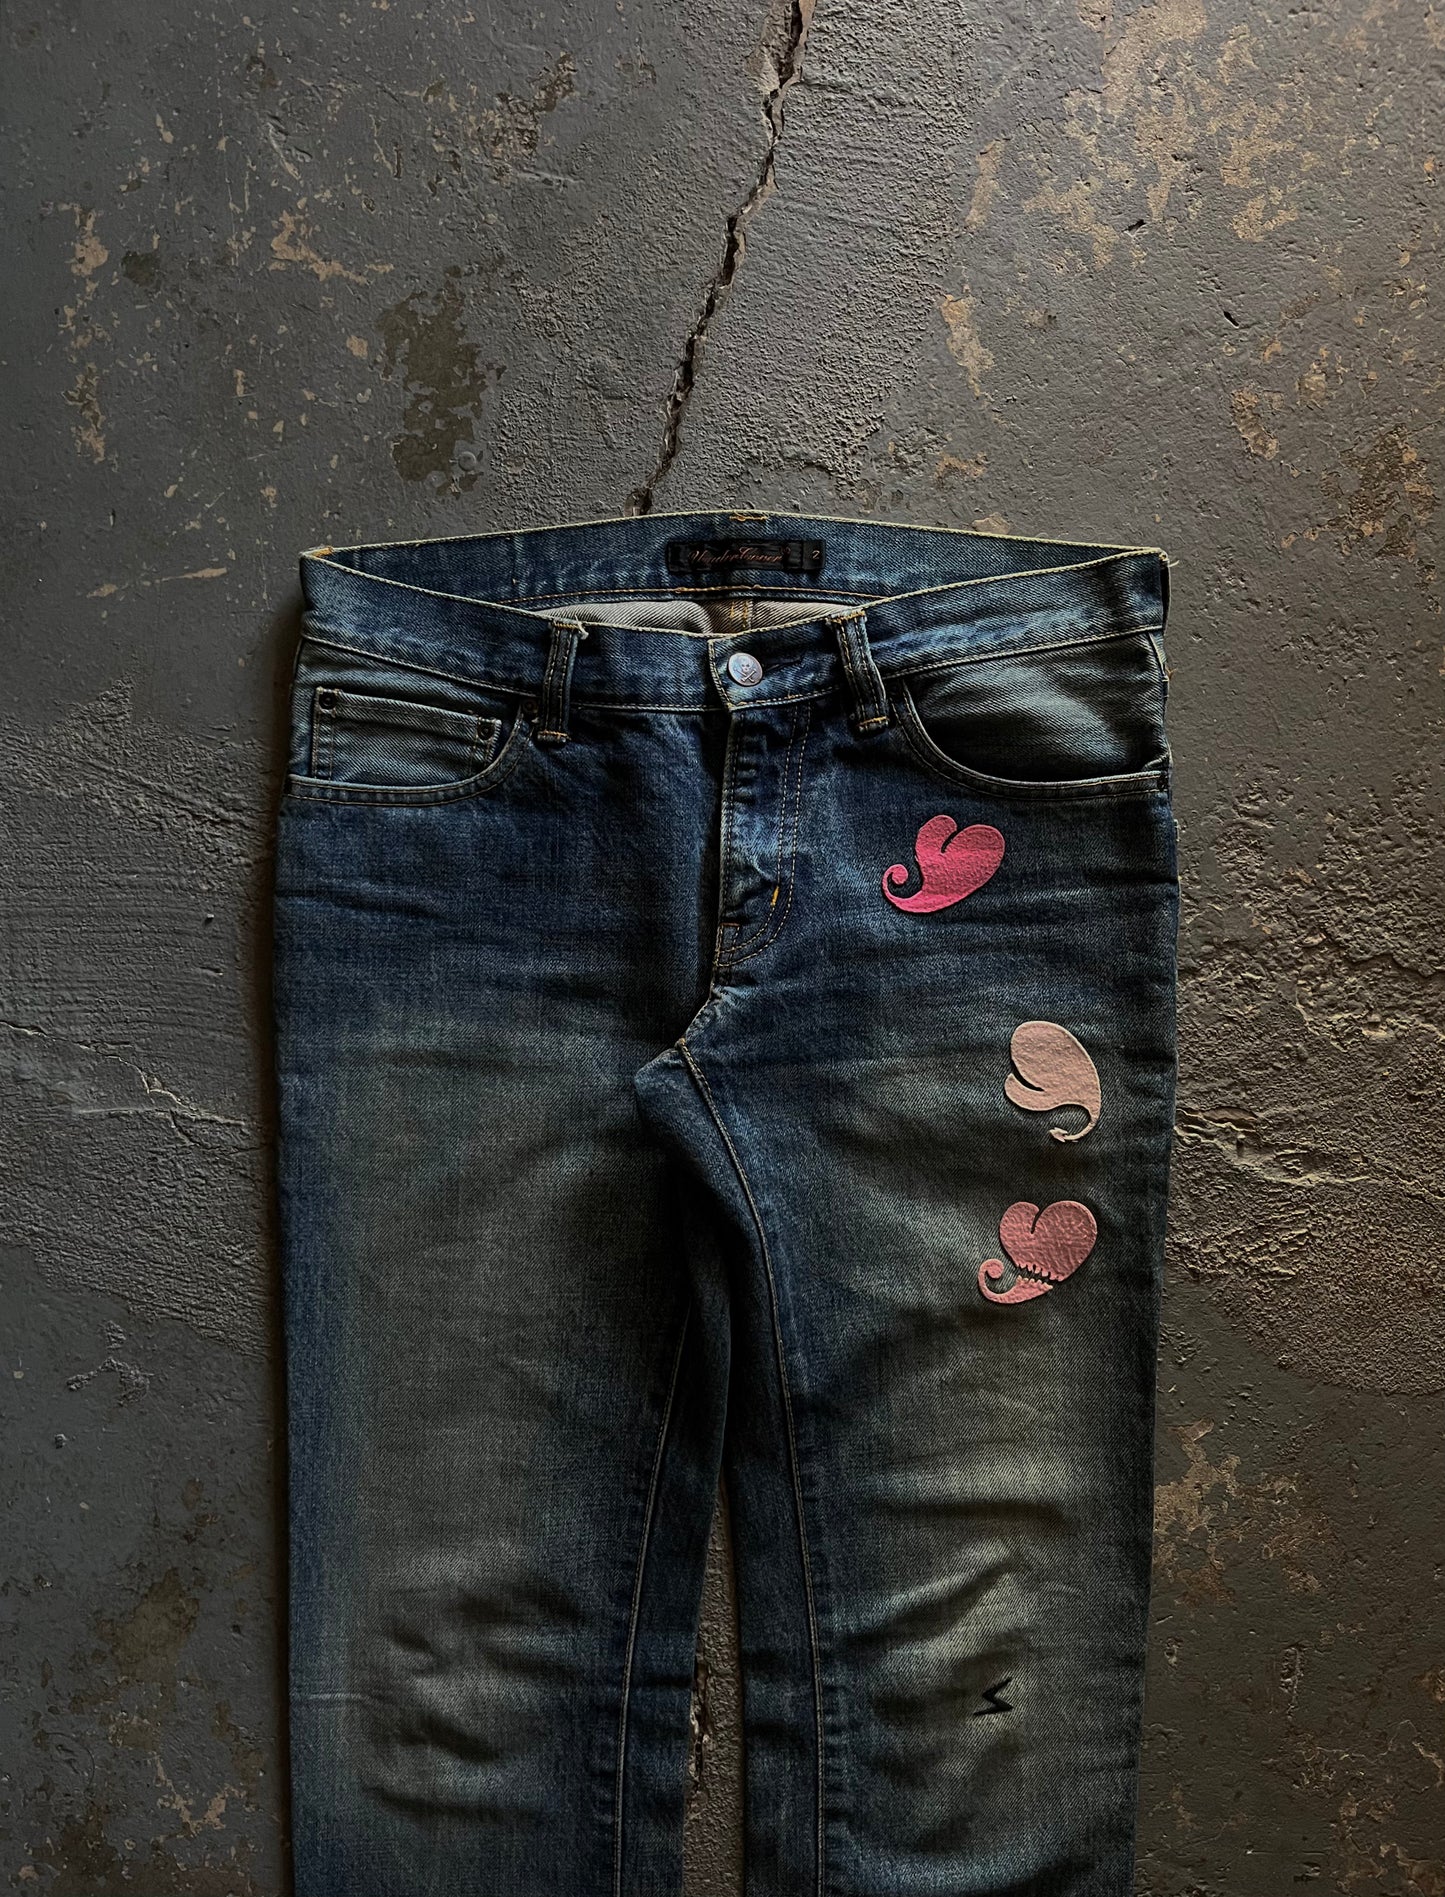 Undercover AW05 “Arts & Crafts” Heart Denim Boro Patchwork Jeans